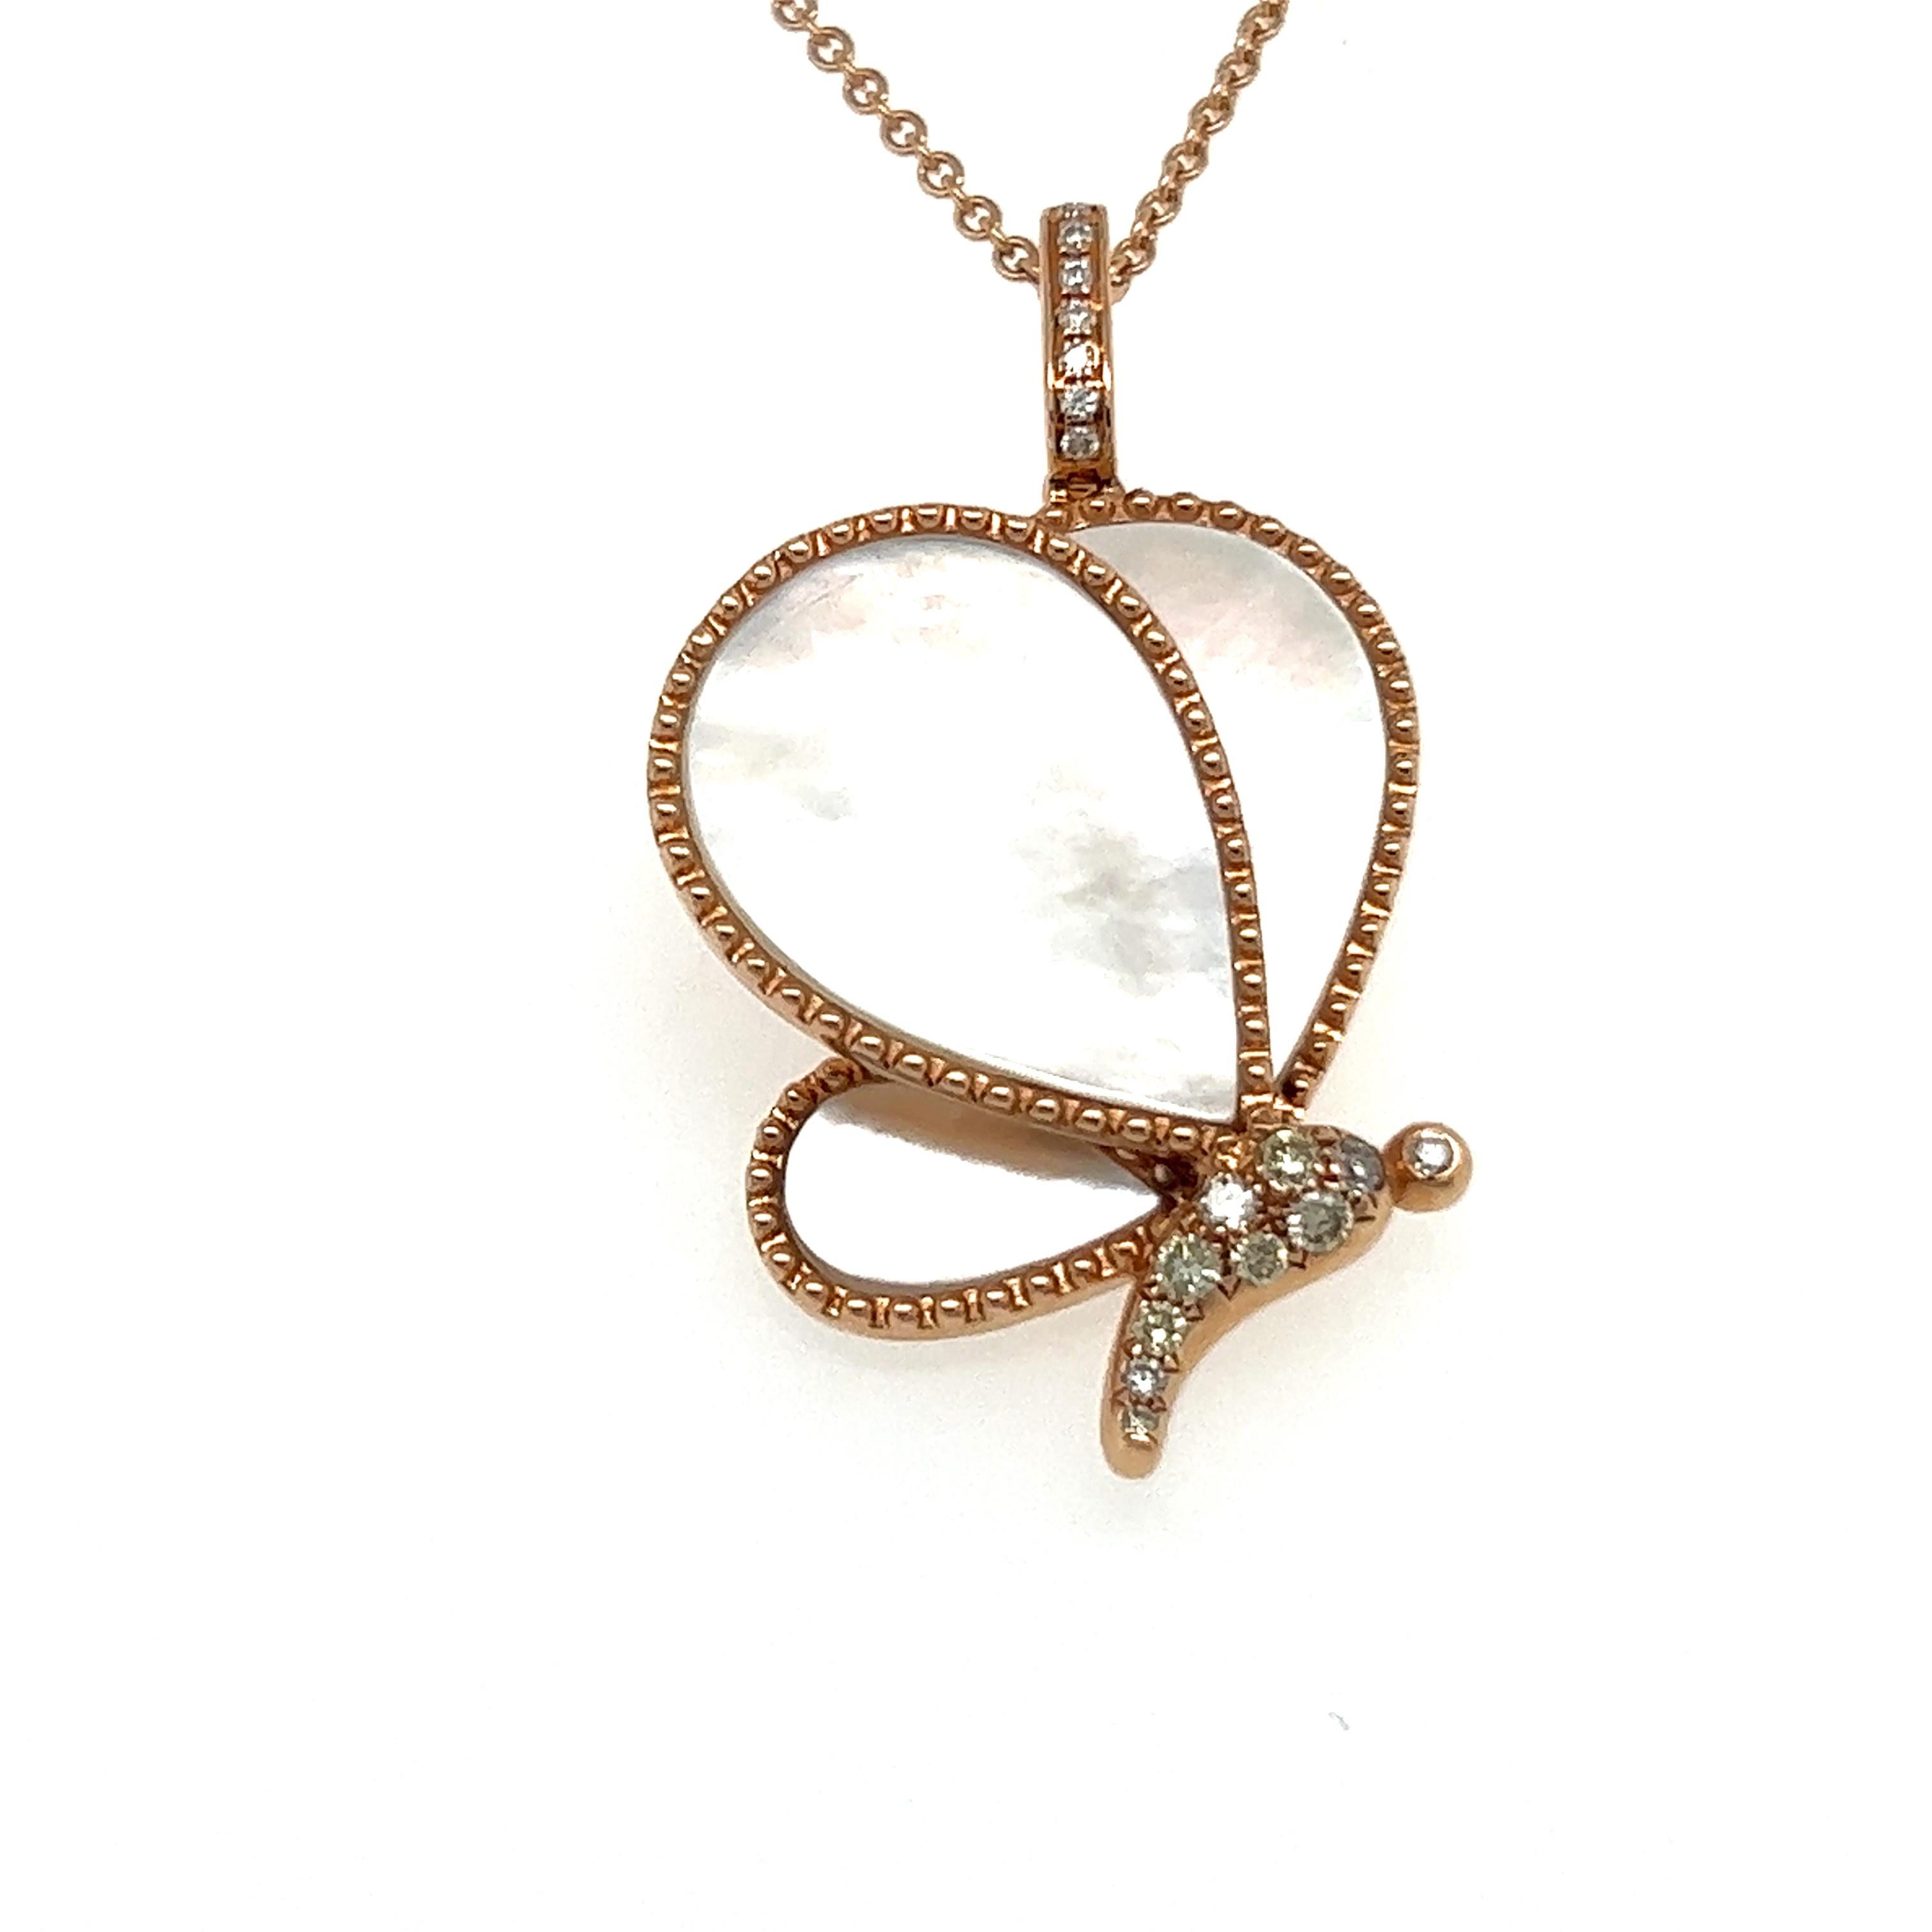 Butterfly White Shell 18K Rose Gold Necklace
8 Diamonds -  0.04CT
9 Fancy Diamonds -  0.14CT
3 White Pearls -  6.32CT
18K Rose Gold -  7.76 GM

Precious white shell is used to wish people good luck. If given to a sailor, a White Pearls necklace is